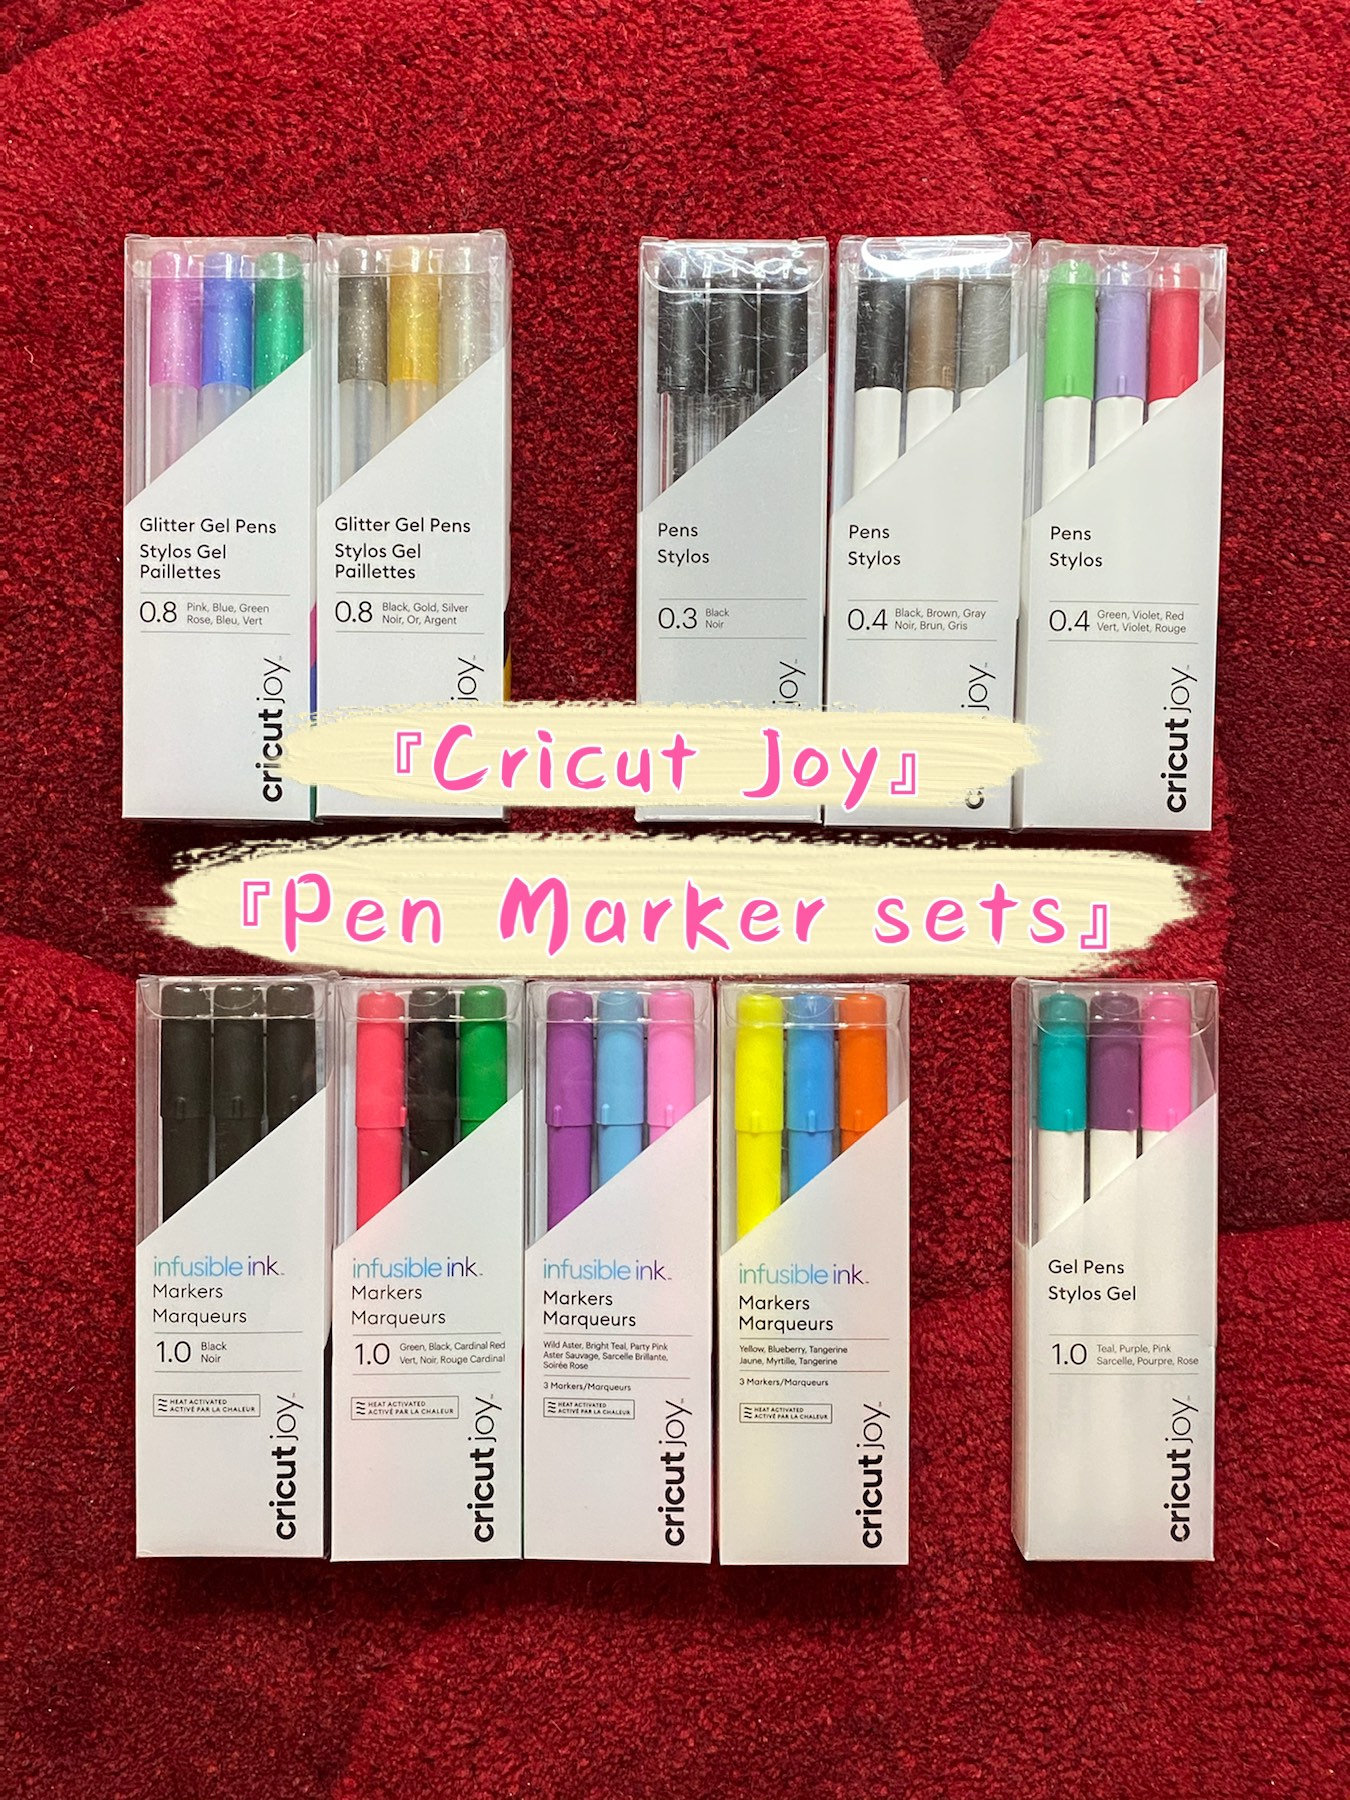 Pens and Markers that Work With Cricut - Katherine Learns Stuff!